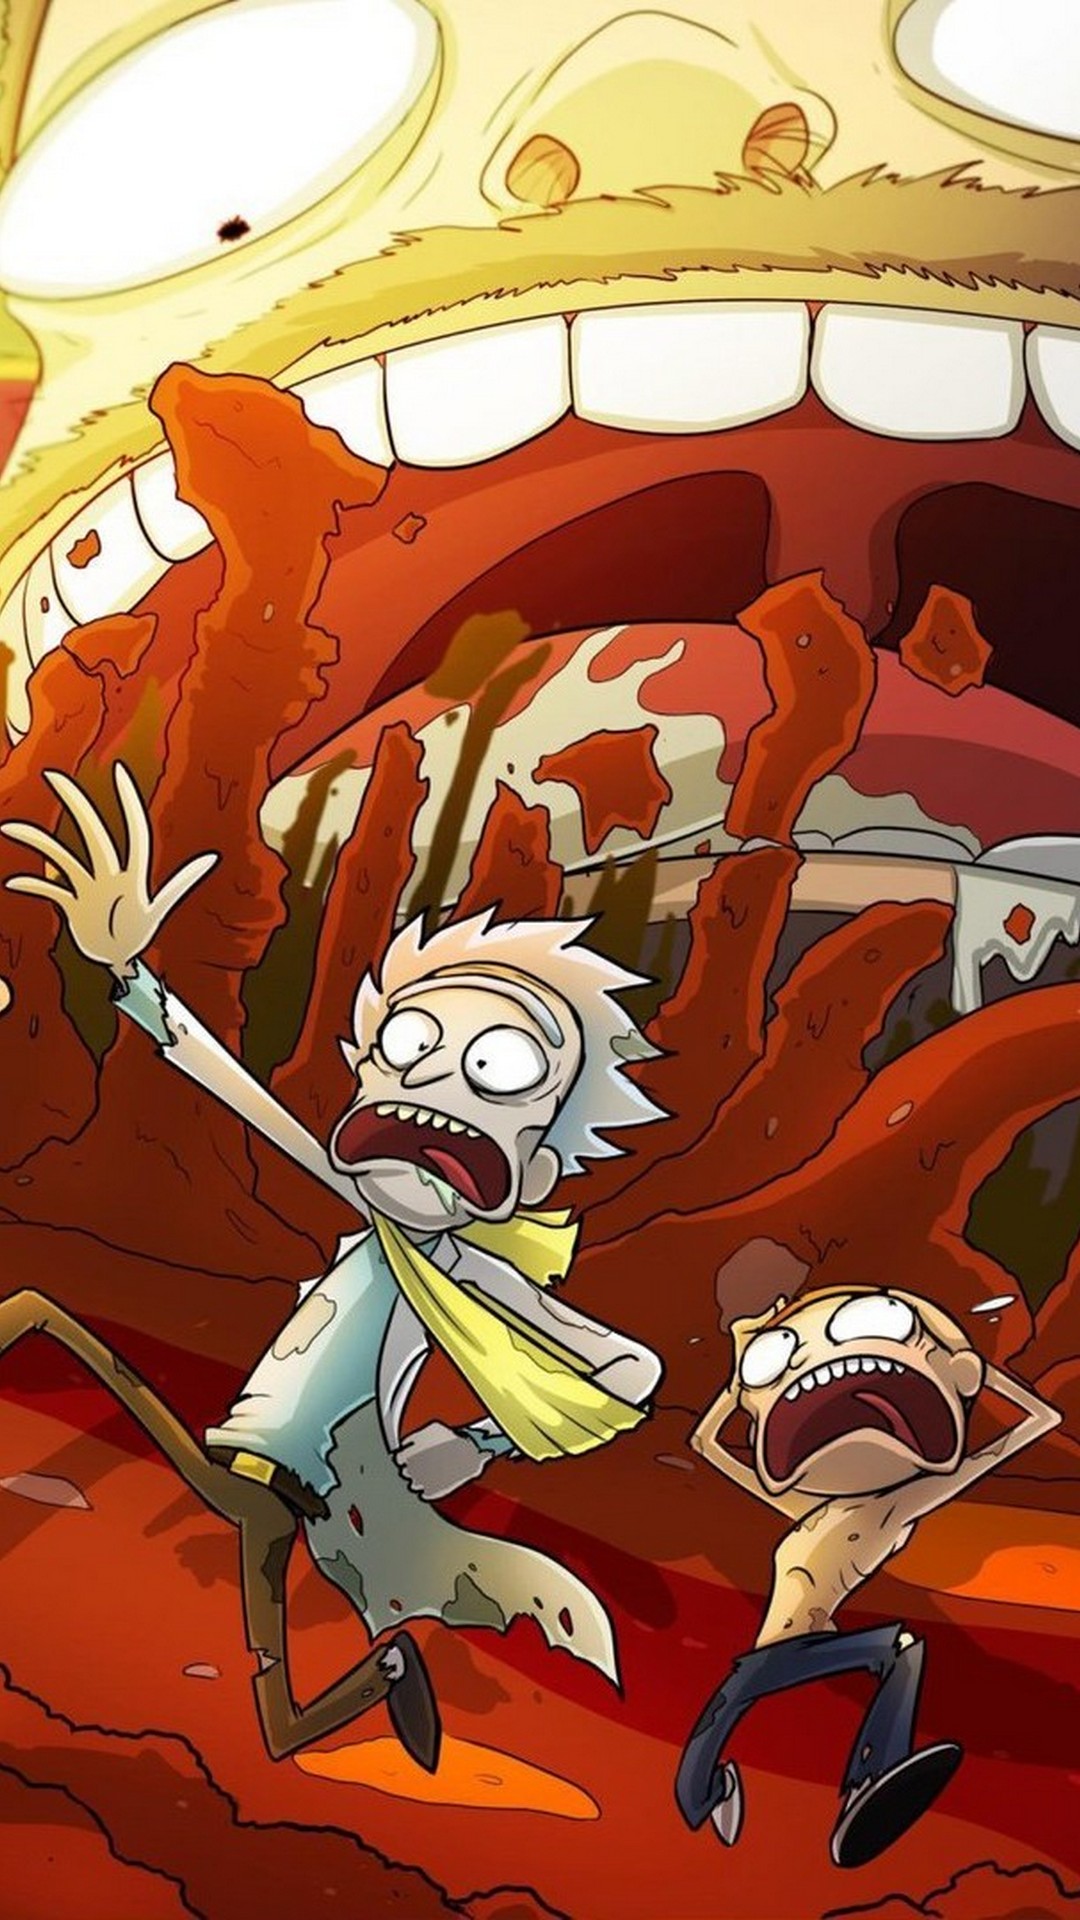 Wallpaper iPhone Rick and Morty 1080p With high-resolution 1080X1920 pixel. You can use this wallpaper for your iPhone 5, 6, 7, 8, X, XS, XR backgrounds, Mobile Screensaver, or iPad Lock Screen